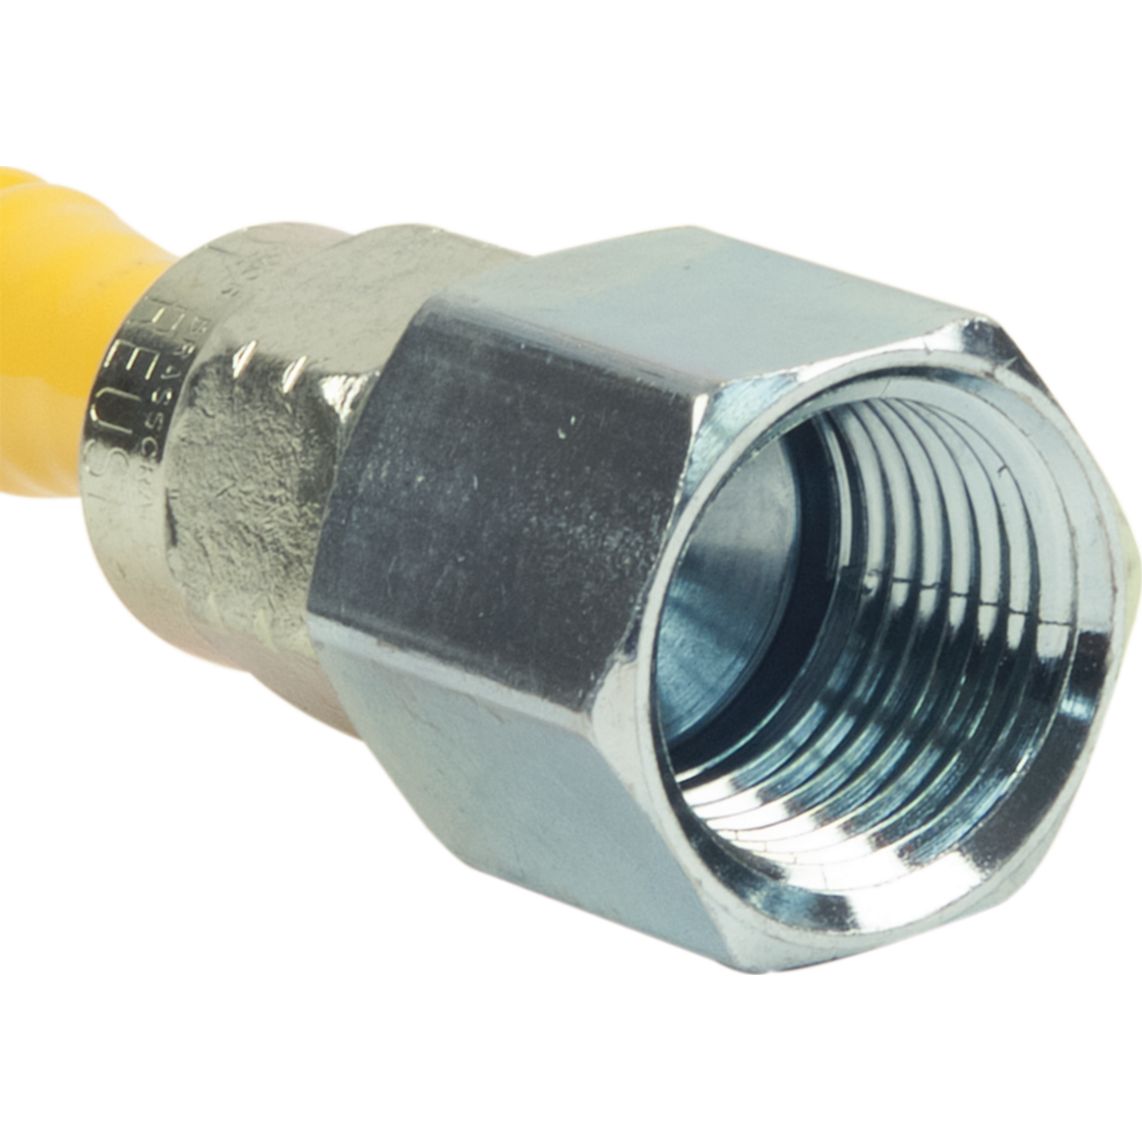 1/2" FIP x 1/2" MIP (3/8" FIP Tap) ProCoat Stainless Steel Gas Connector